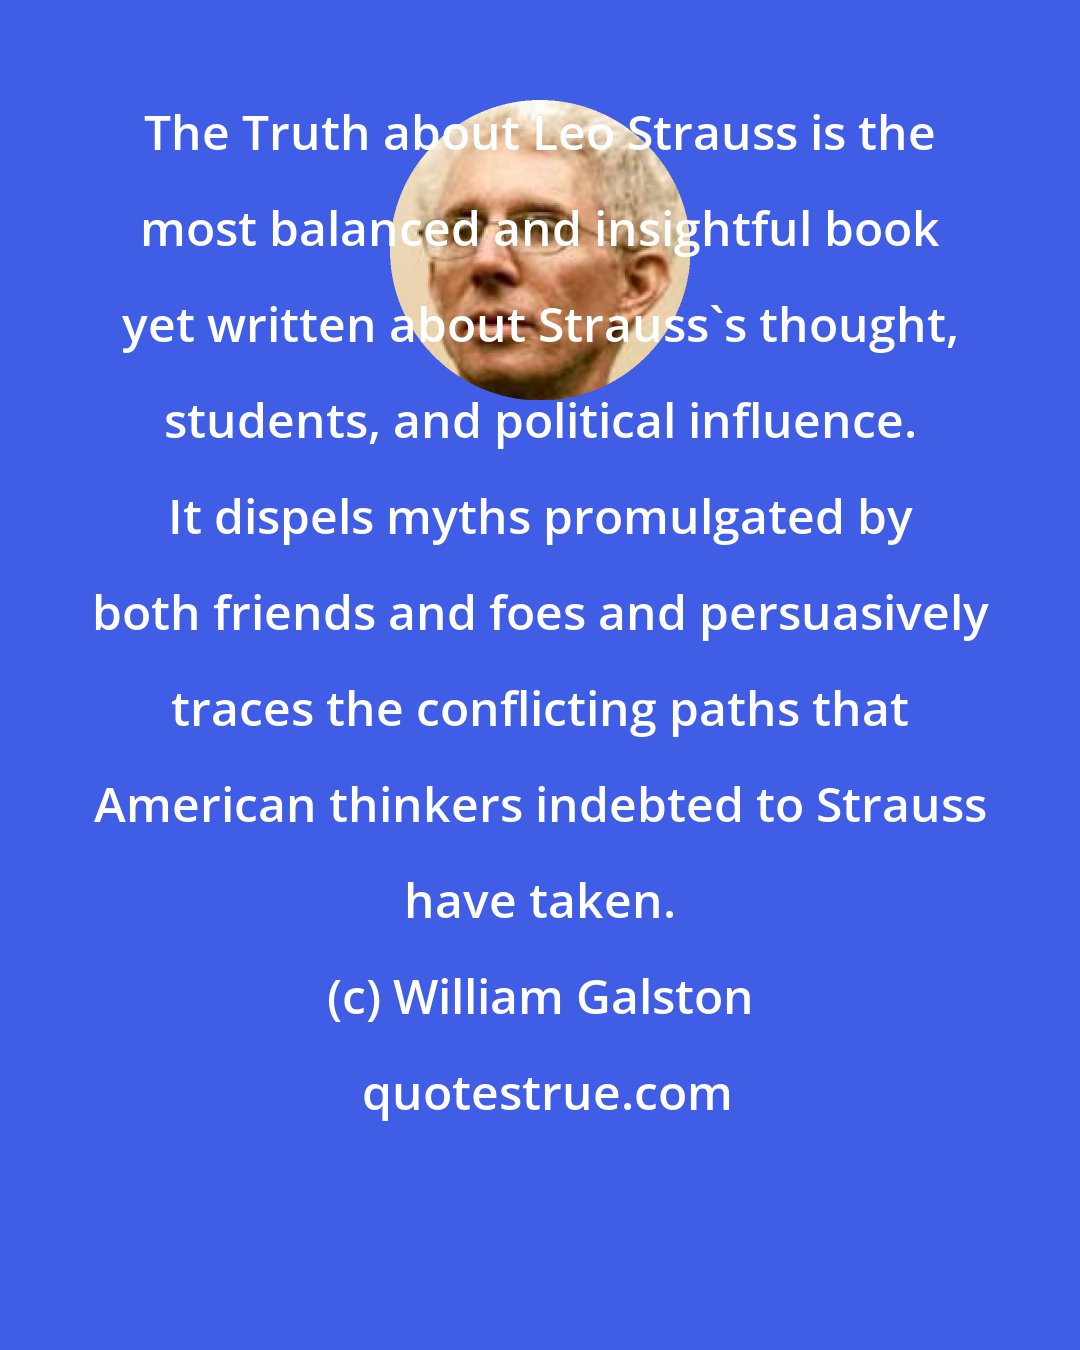 William Galston: The Truth about Leo Strauss is the most balanced and insightful book yet written about Strauss's thought, students, and political influence. It dispels myths promulgated by both friends and foes and persuasively traces the conflicting paths that American thinkers indebted to Strauss have taken.